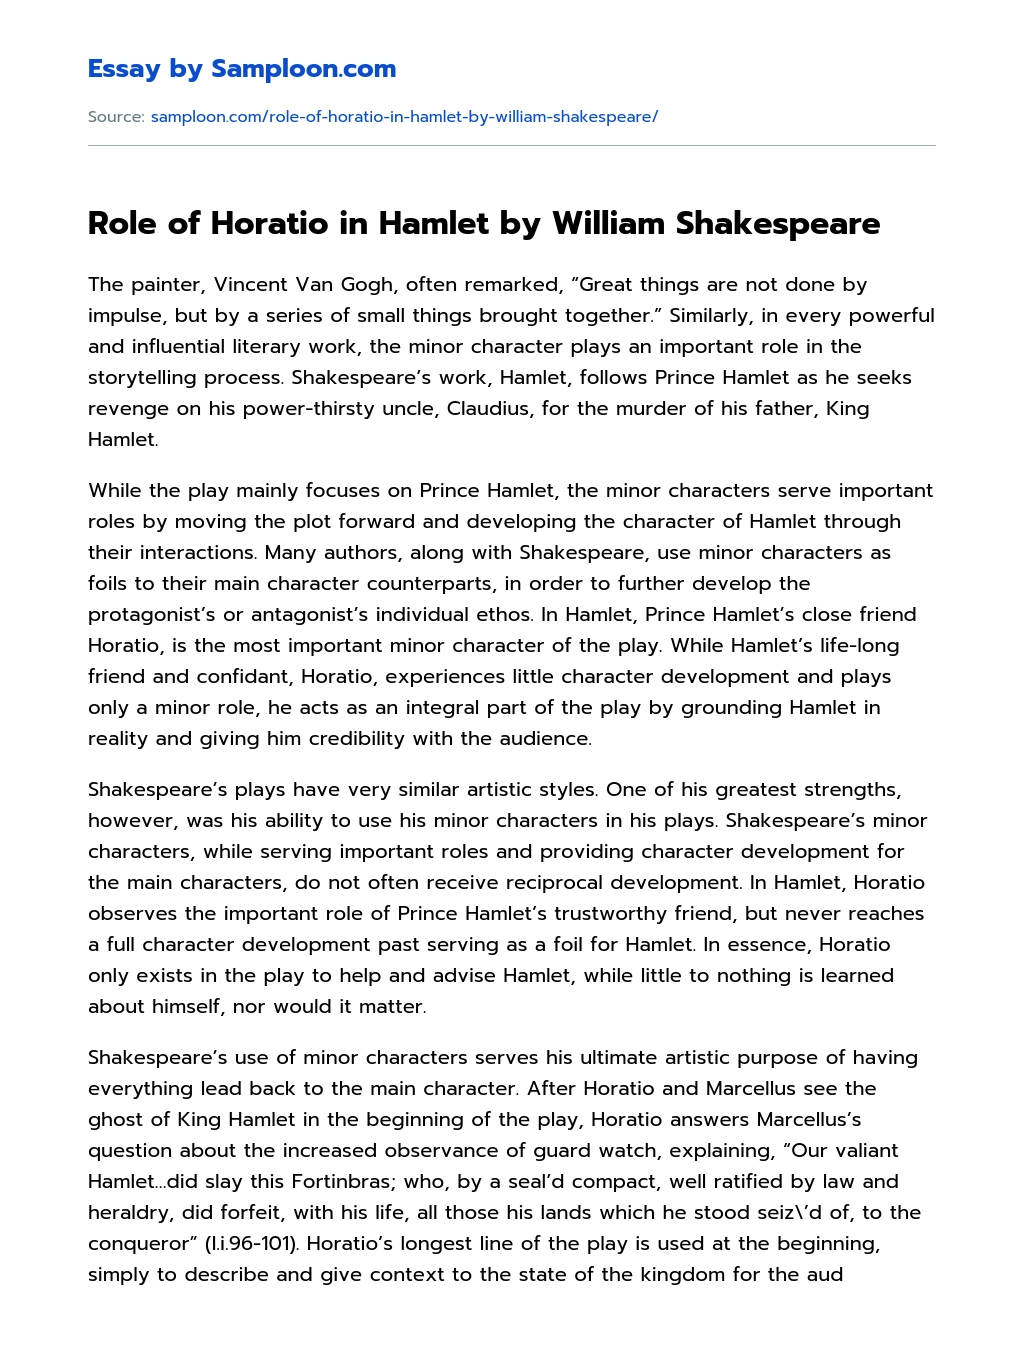 Role of Horatio in Hamlet by William Shakespeare essay